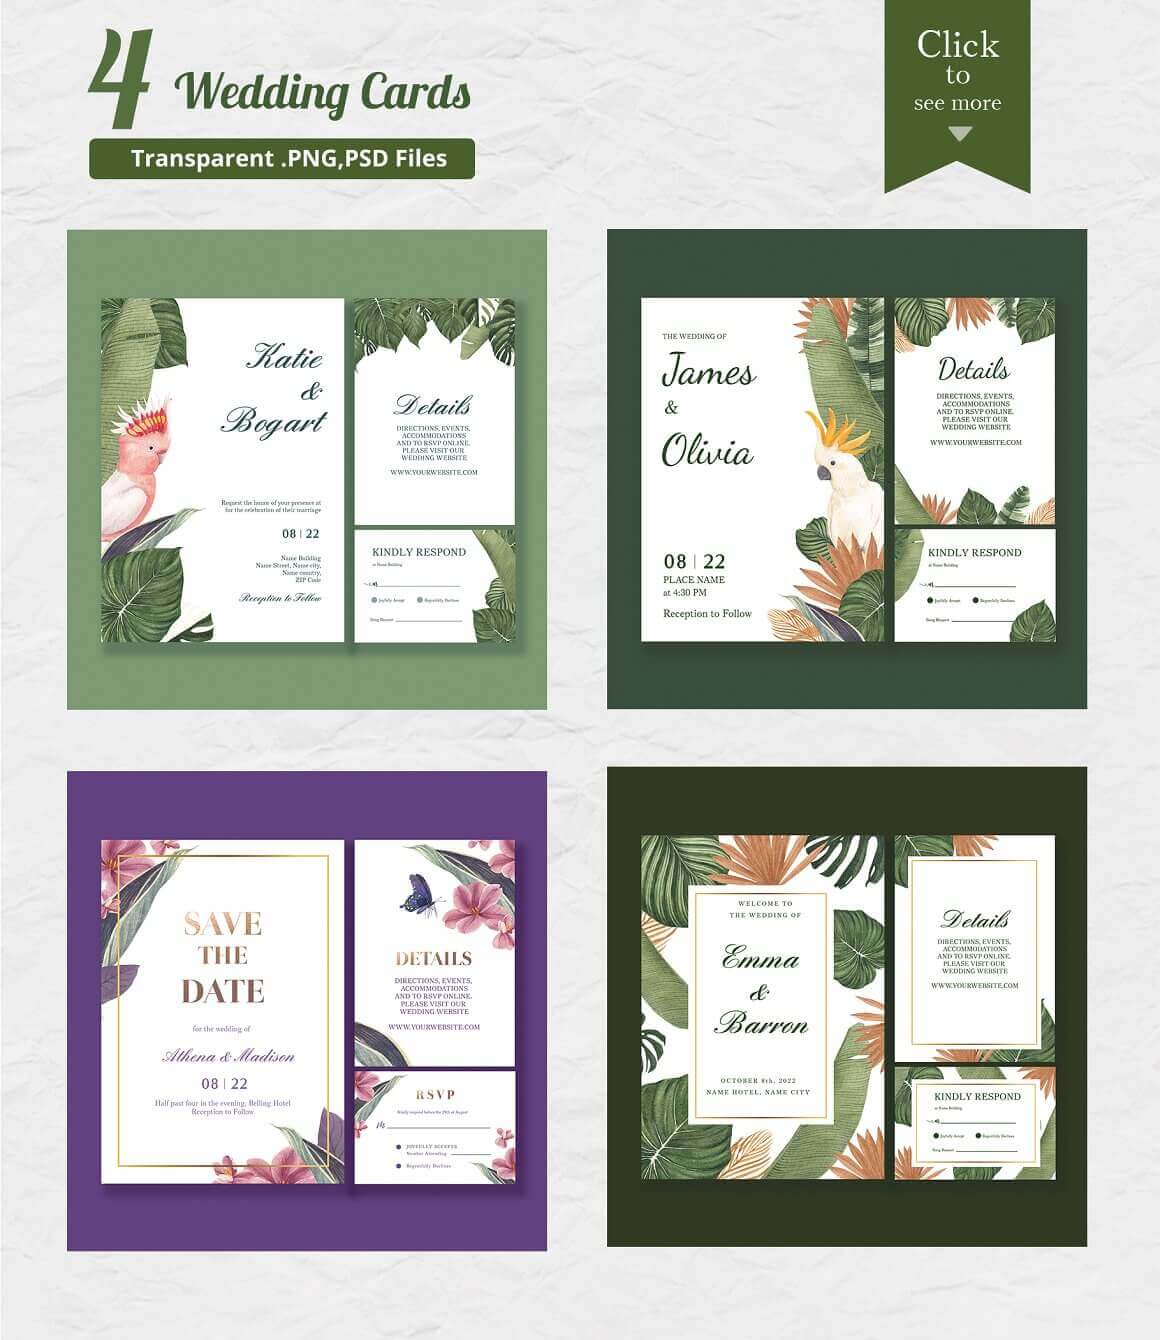 4 wedding cards in purple and green colors.